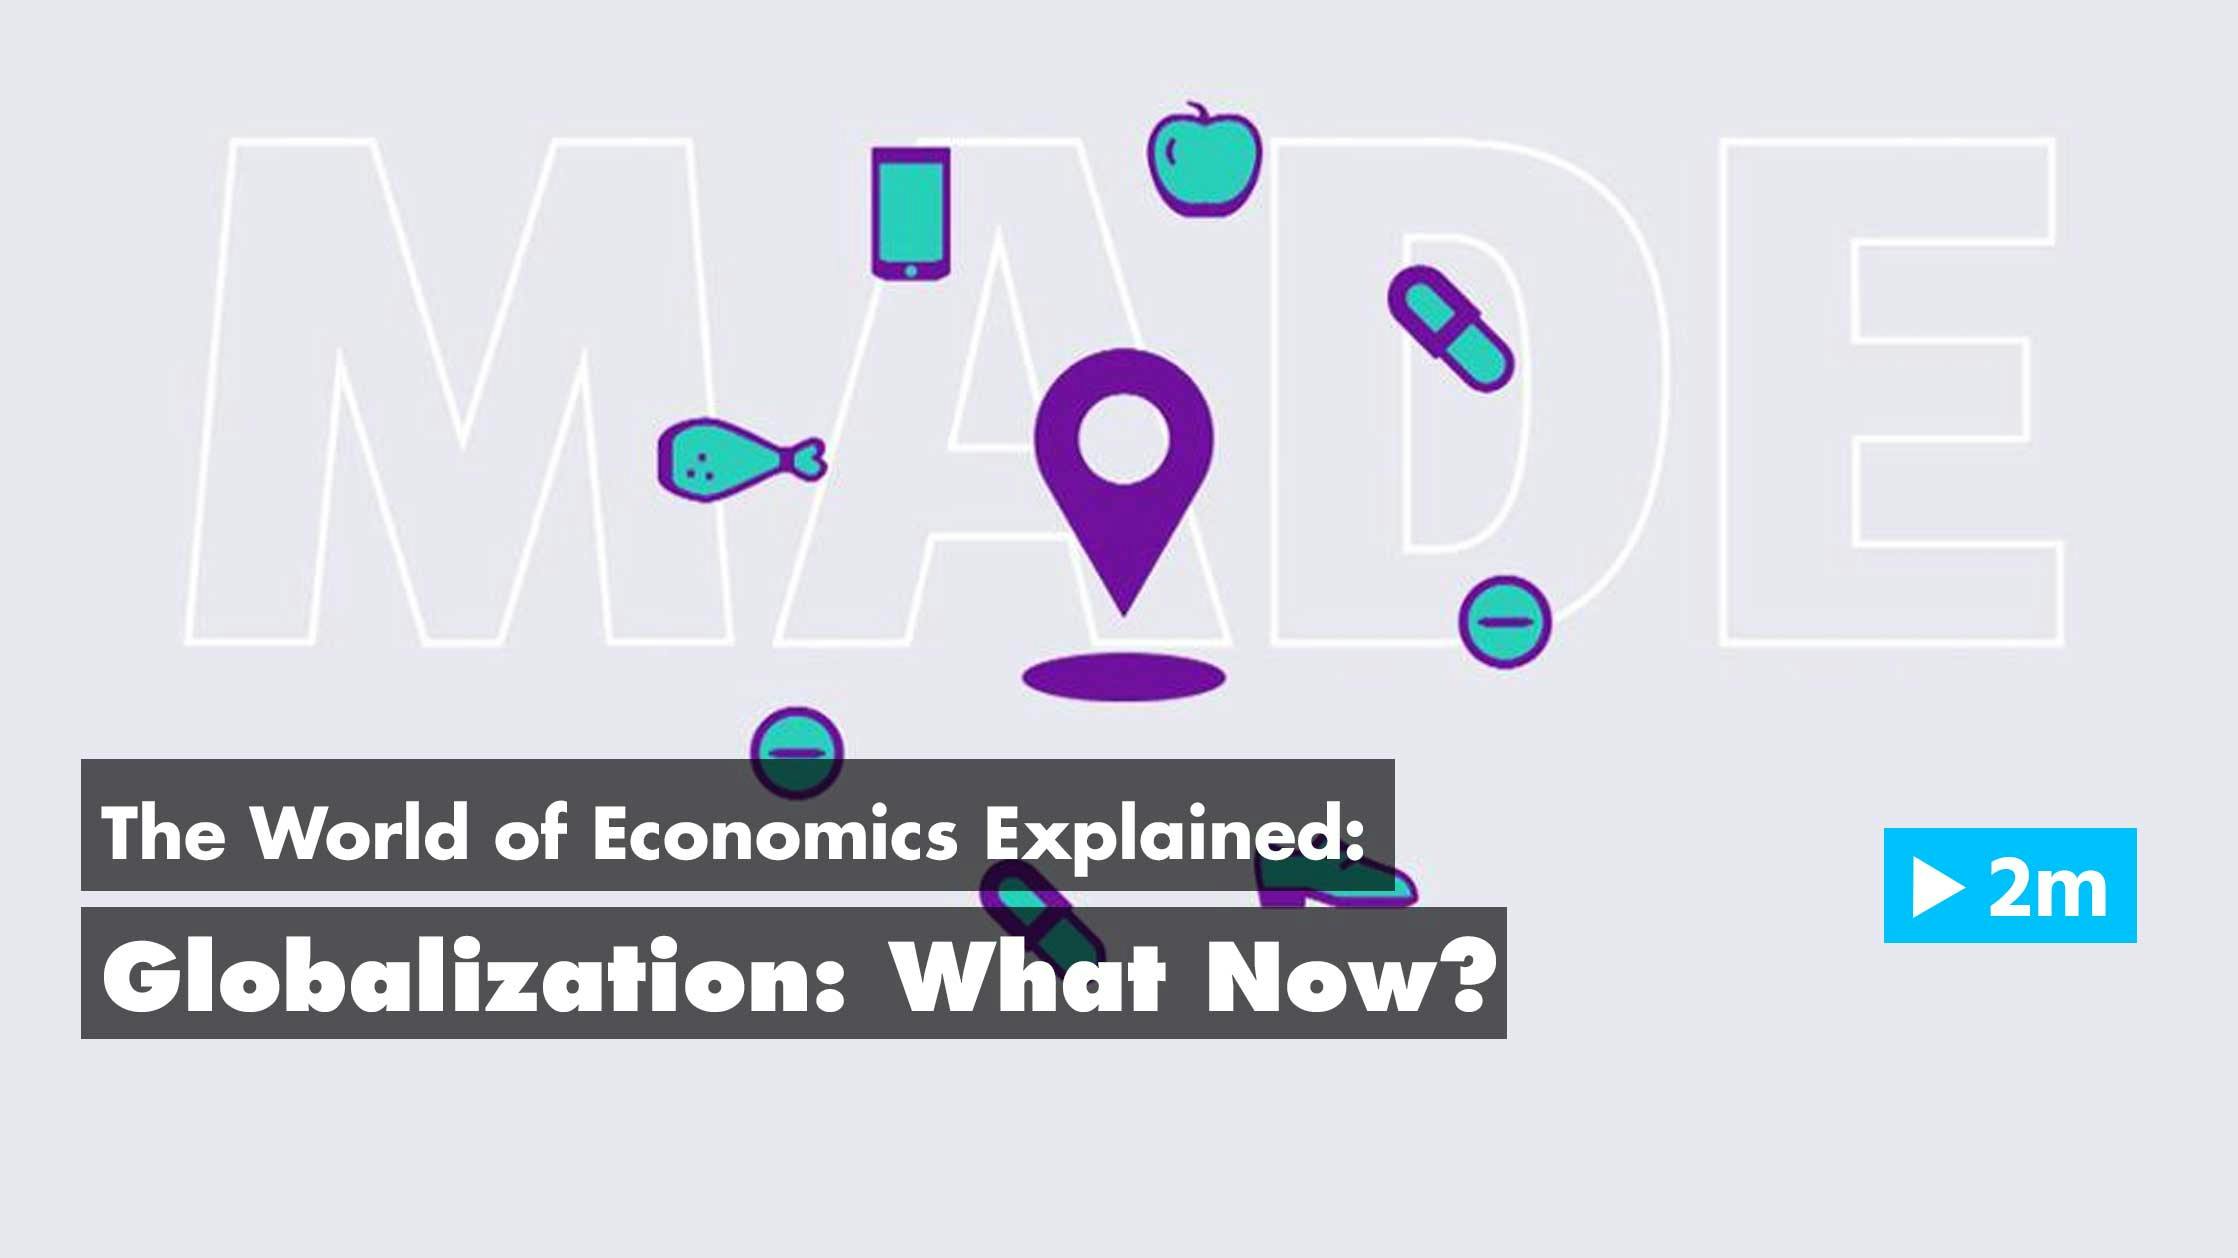 The World of Economics Explained: Globalization - What Now?